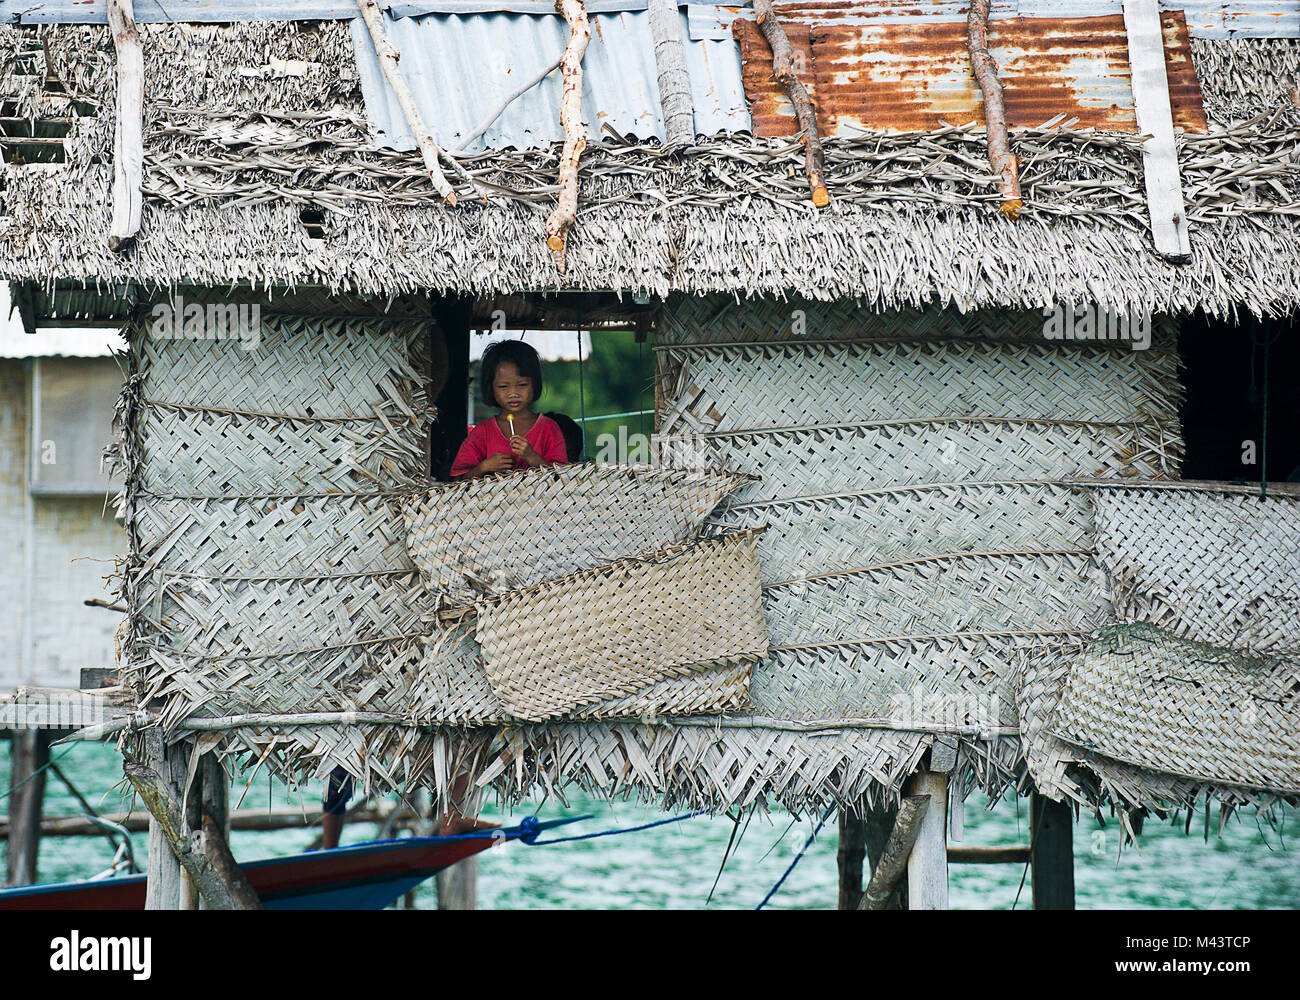 The Bajau Laut are known as ‘Sea Gypsies’ due to their nomadic, seafaring way of life. Stock Photo